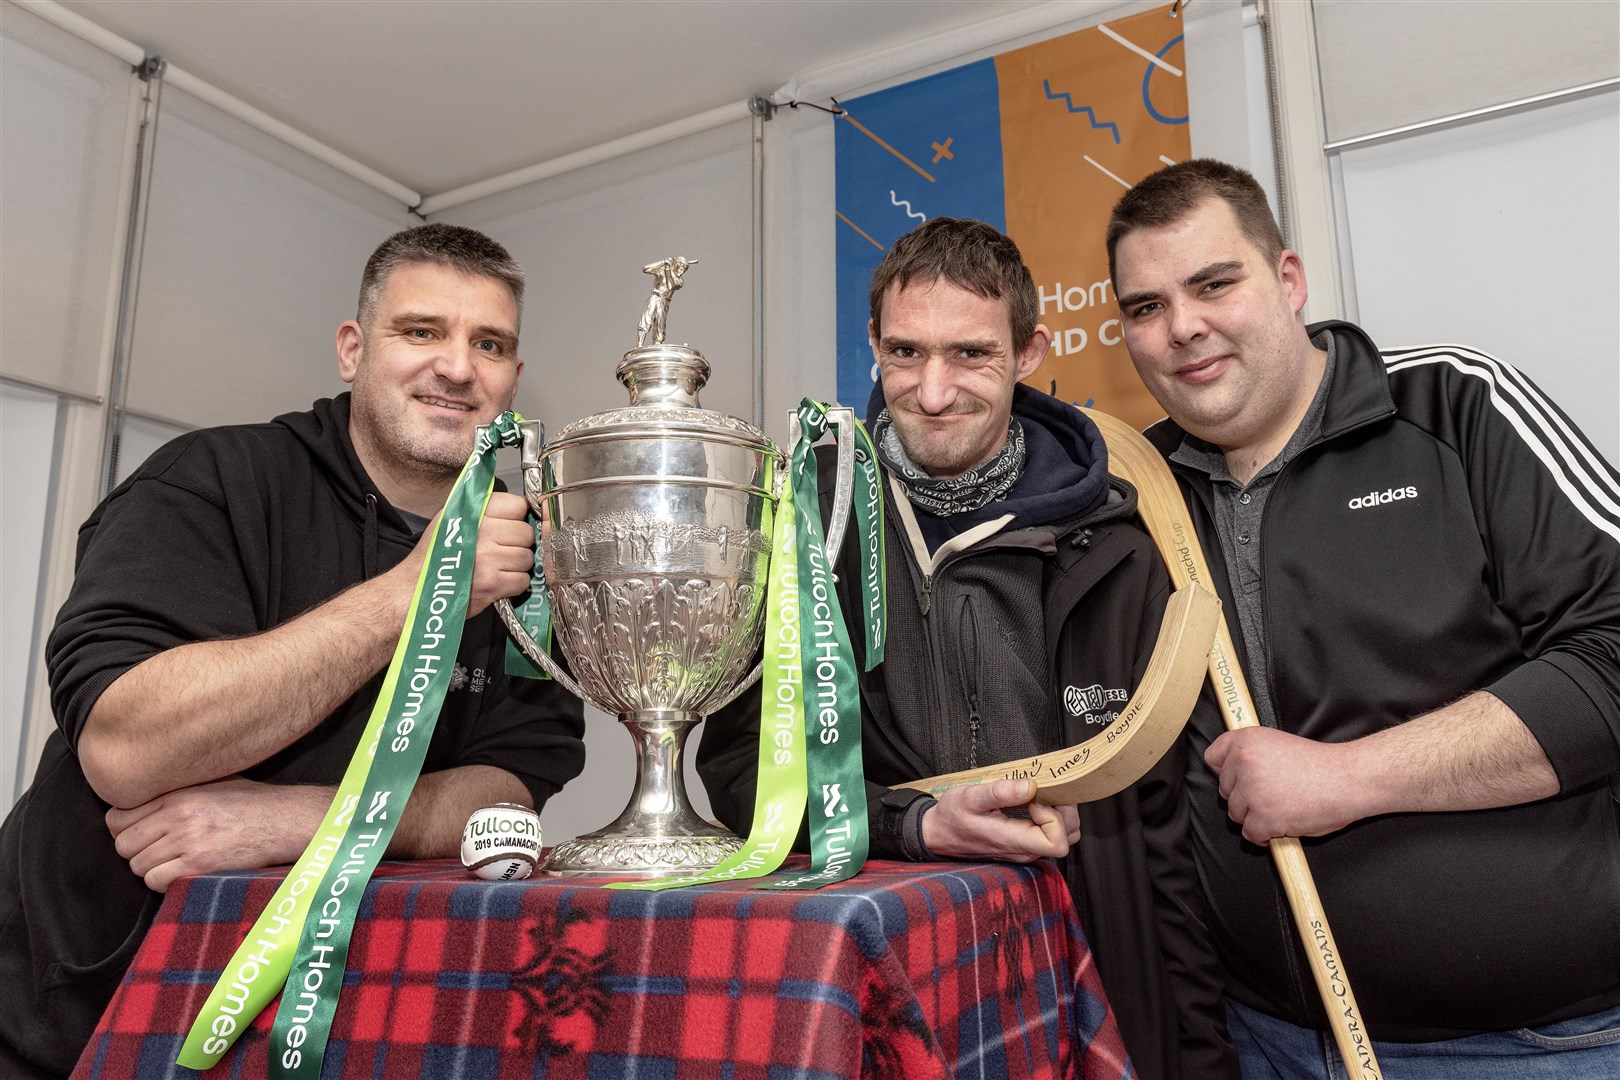 Tulloch Homes Camanachd Cup Draw made by Peat & Diesel ahead of their sell-out concert at Strathpeffer Pavillion: Innes (Scott), Boydie (MacLeod) and Uilly (MacLeod).